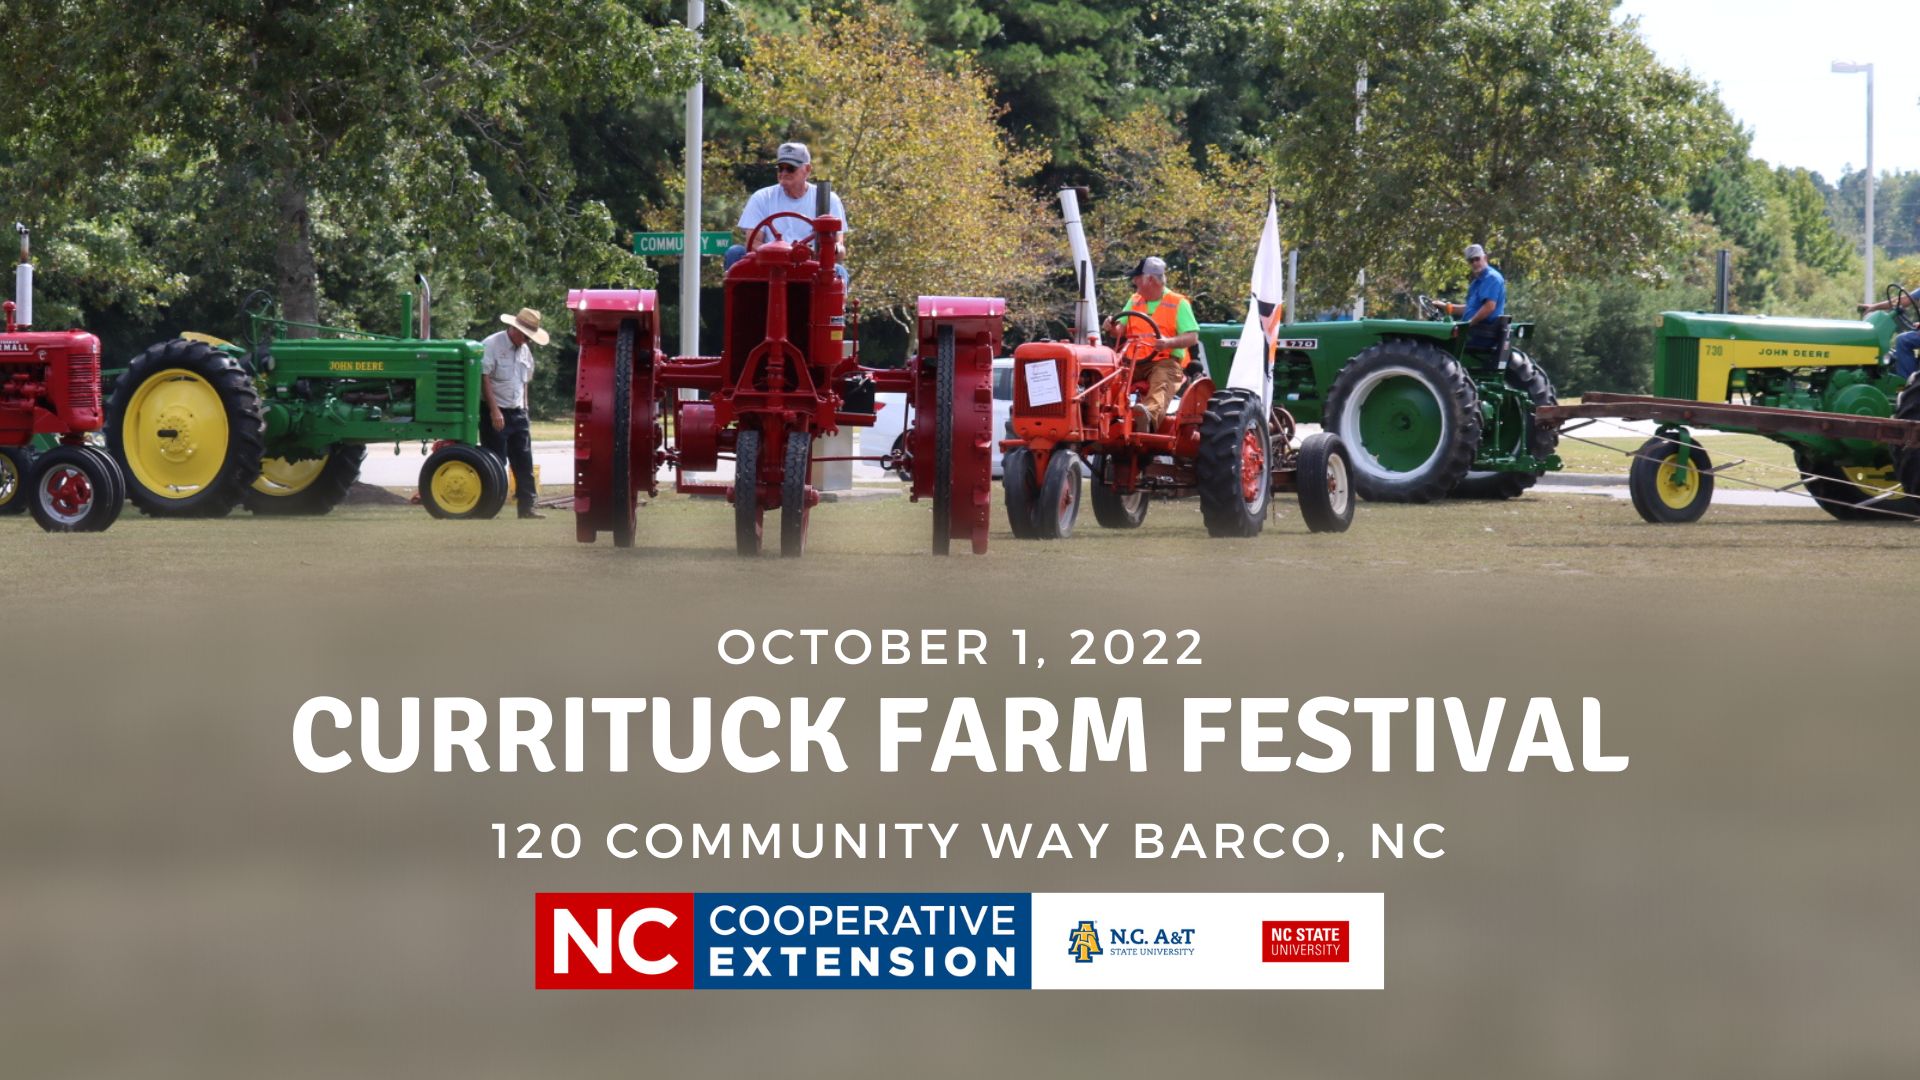 tractors with title Currituck Farm Festival October 1